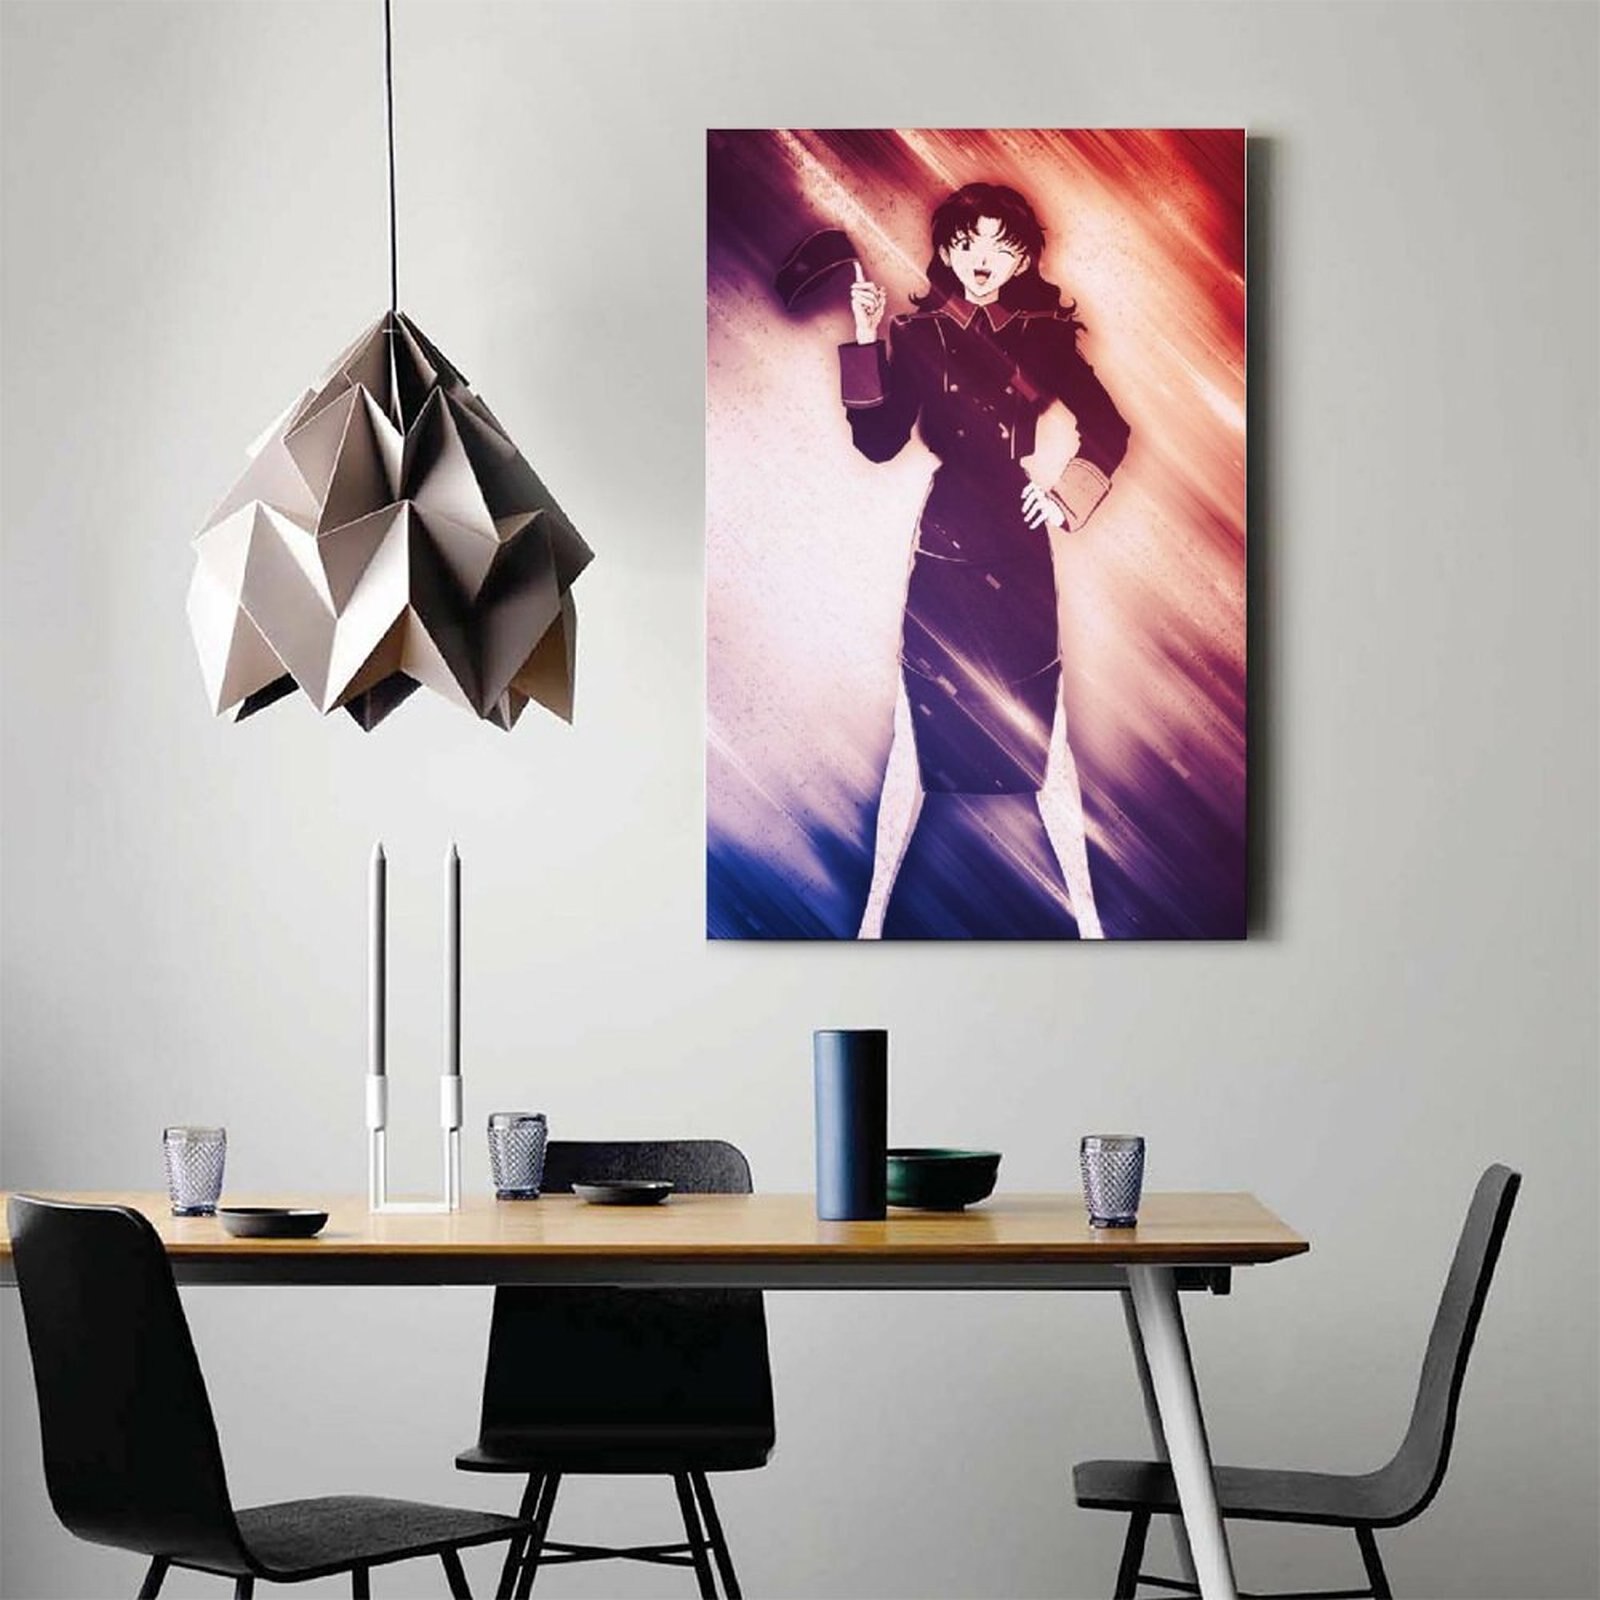 Anime Misato Evangelion GirlCanvas Painting Wall Art Posters and Prints Wall Pictures for Living Room Decoration 2 - Evangelion Shop